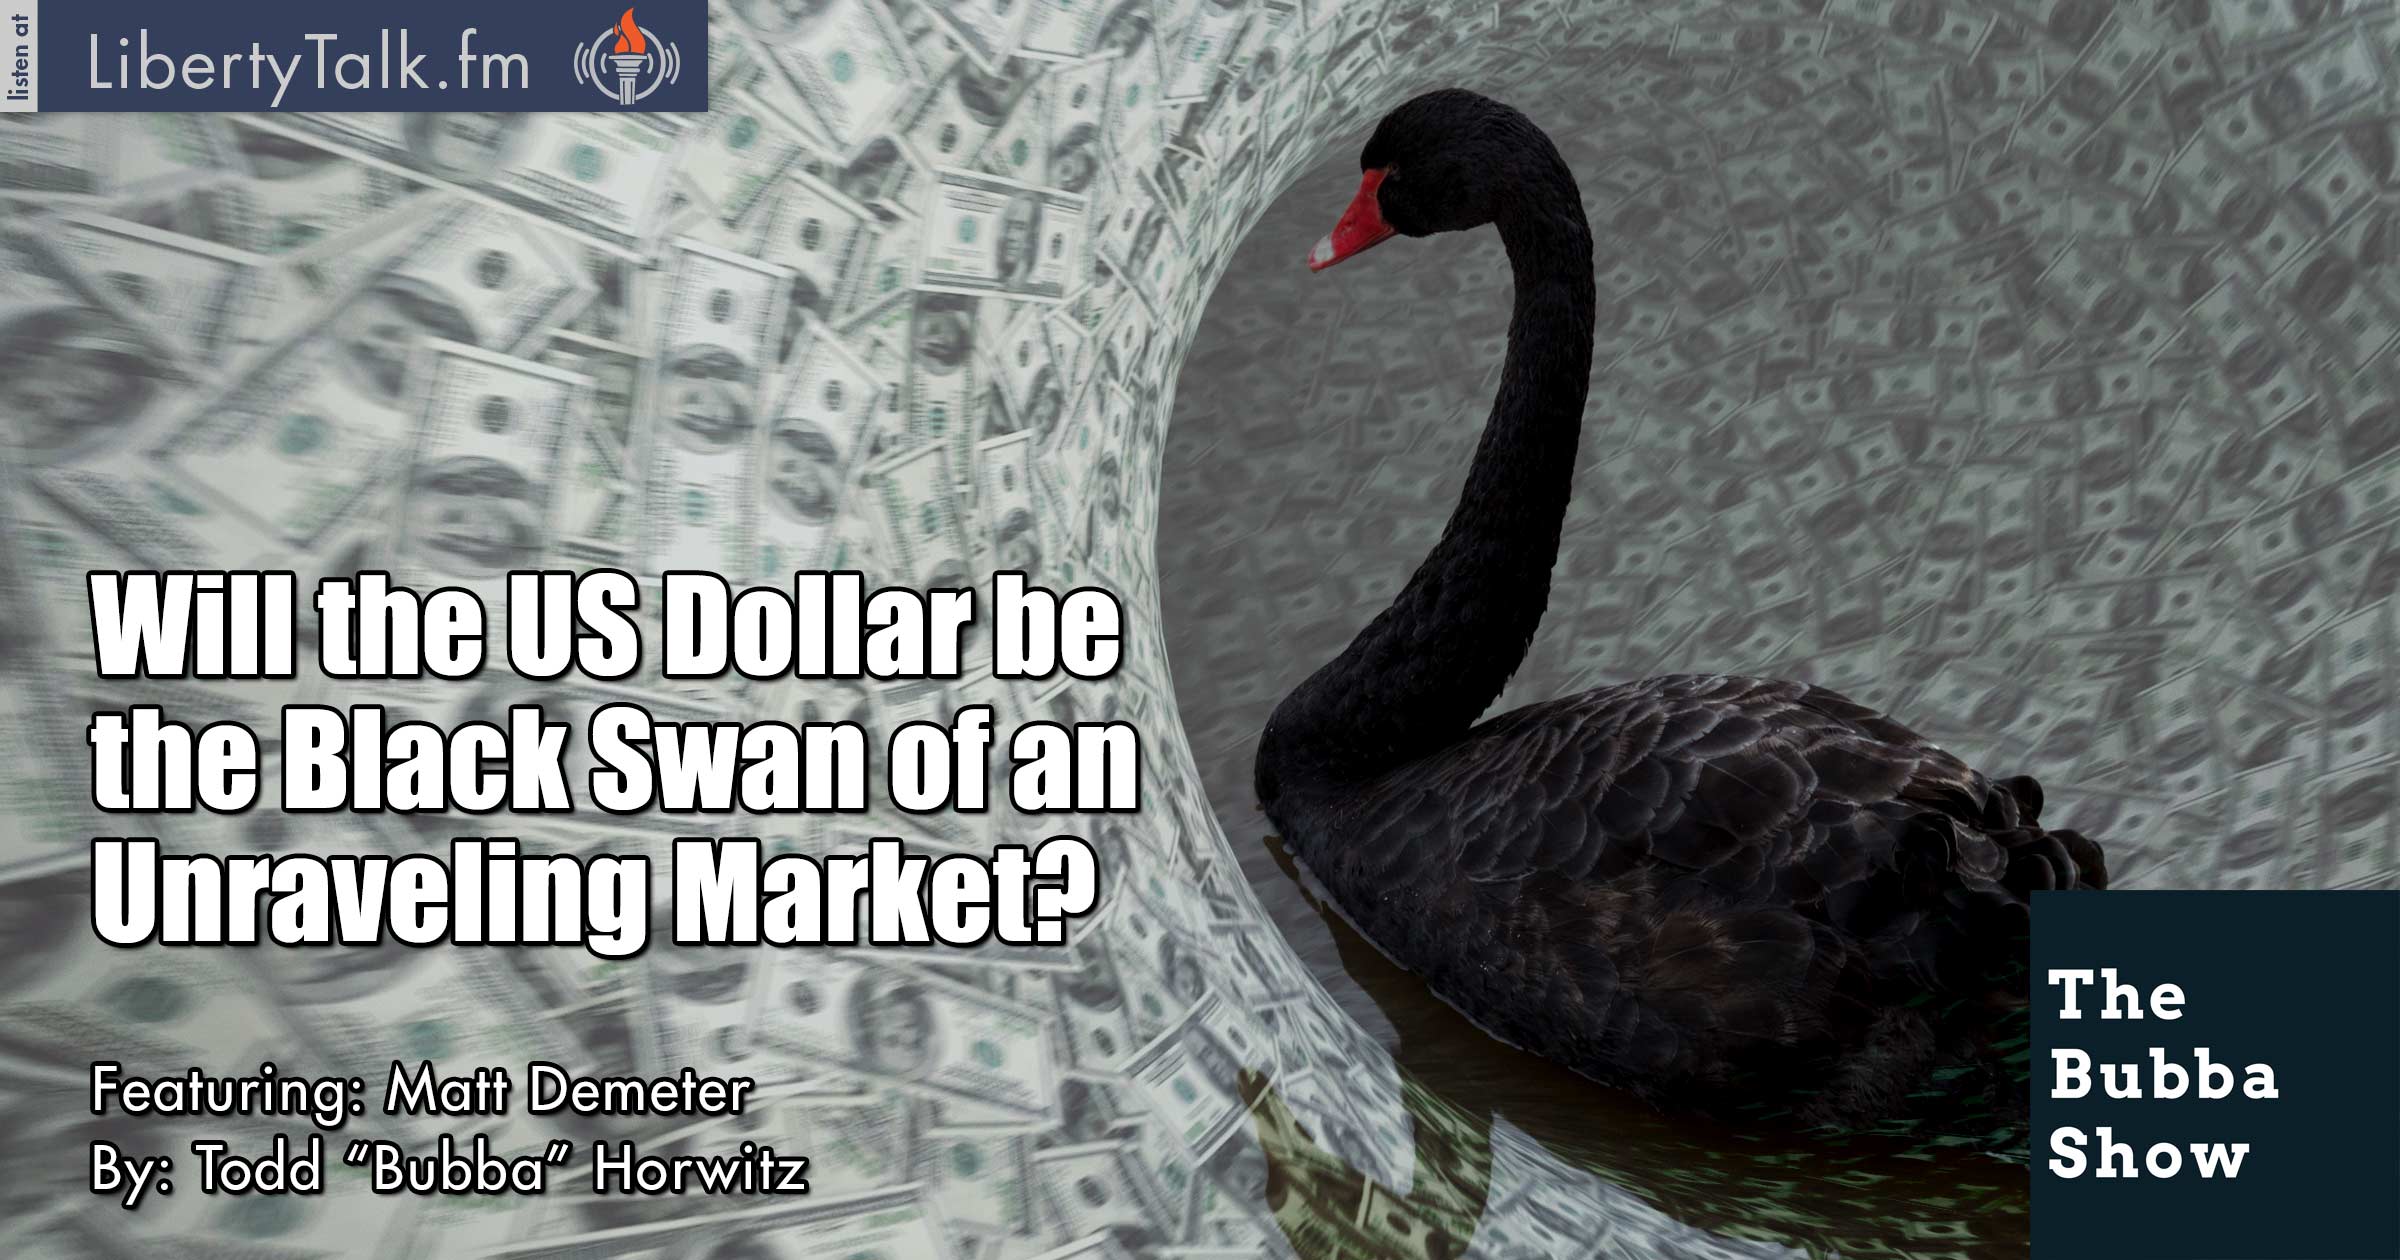 FWill the US Dollar be the Black Swan of an Unraveling Market? - The Bubba Show